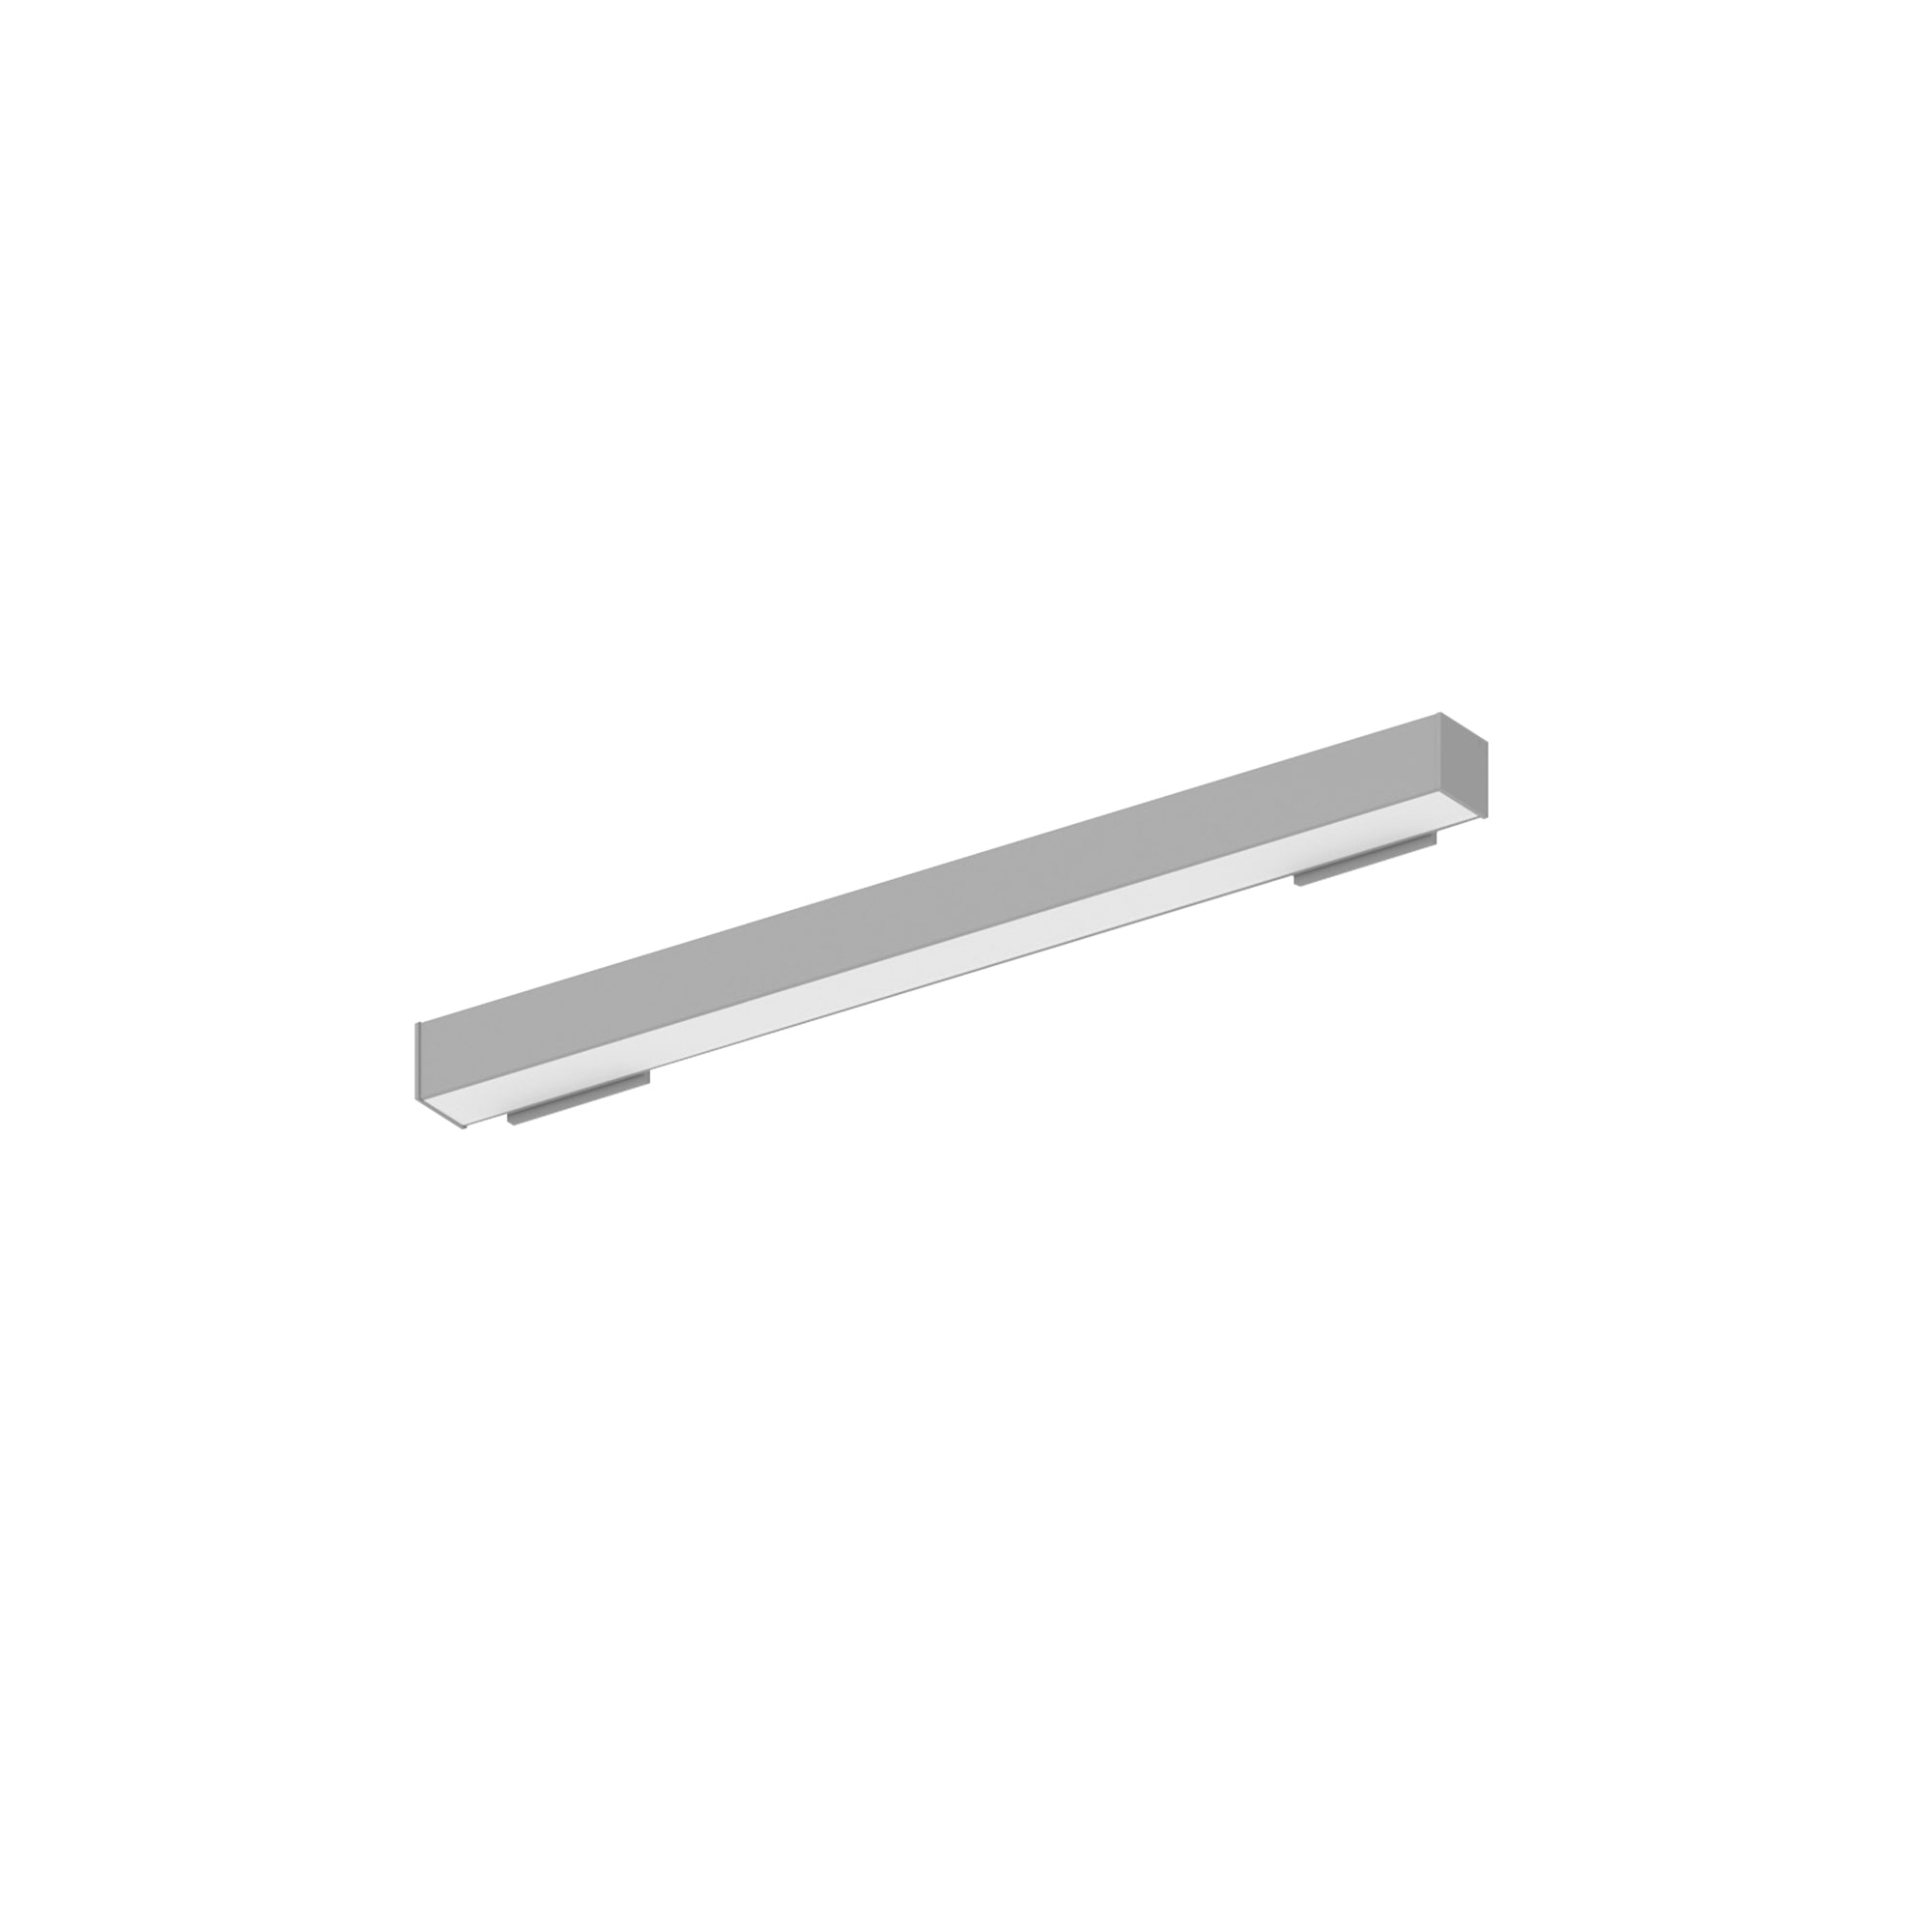 Nora Lighting NWLIN-21030A/L2P-R2 - Linear - 2' L-Line LED Wall Mount Linear, 2100lm / 3000K, 2 Inchx4 Inch Left Plate & 2 Inchx4 Inch Right Plate, Left Power Feed, Aluminum Finish